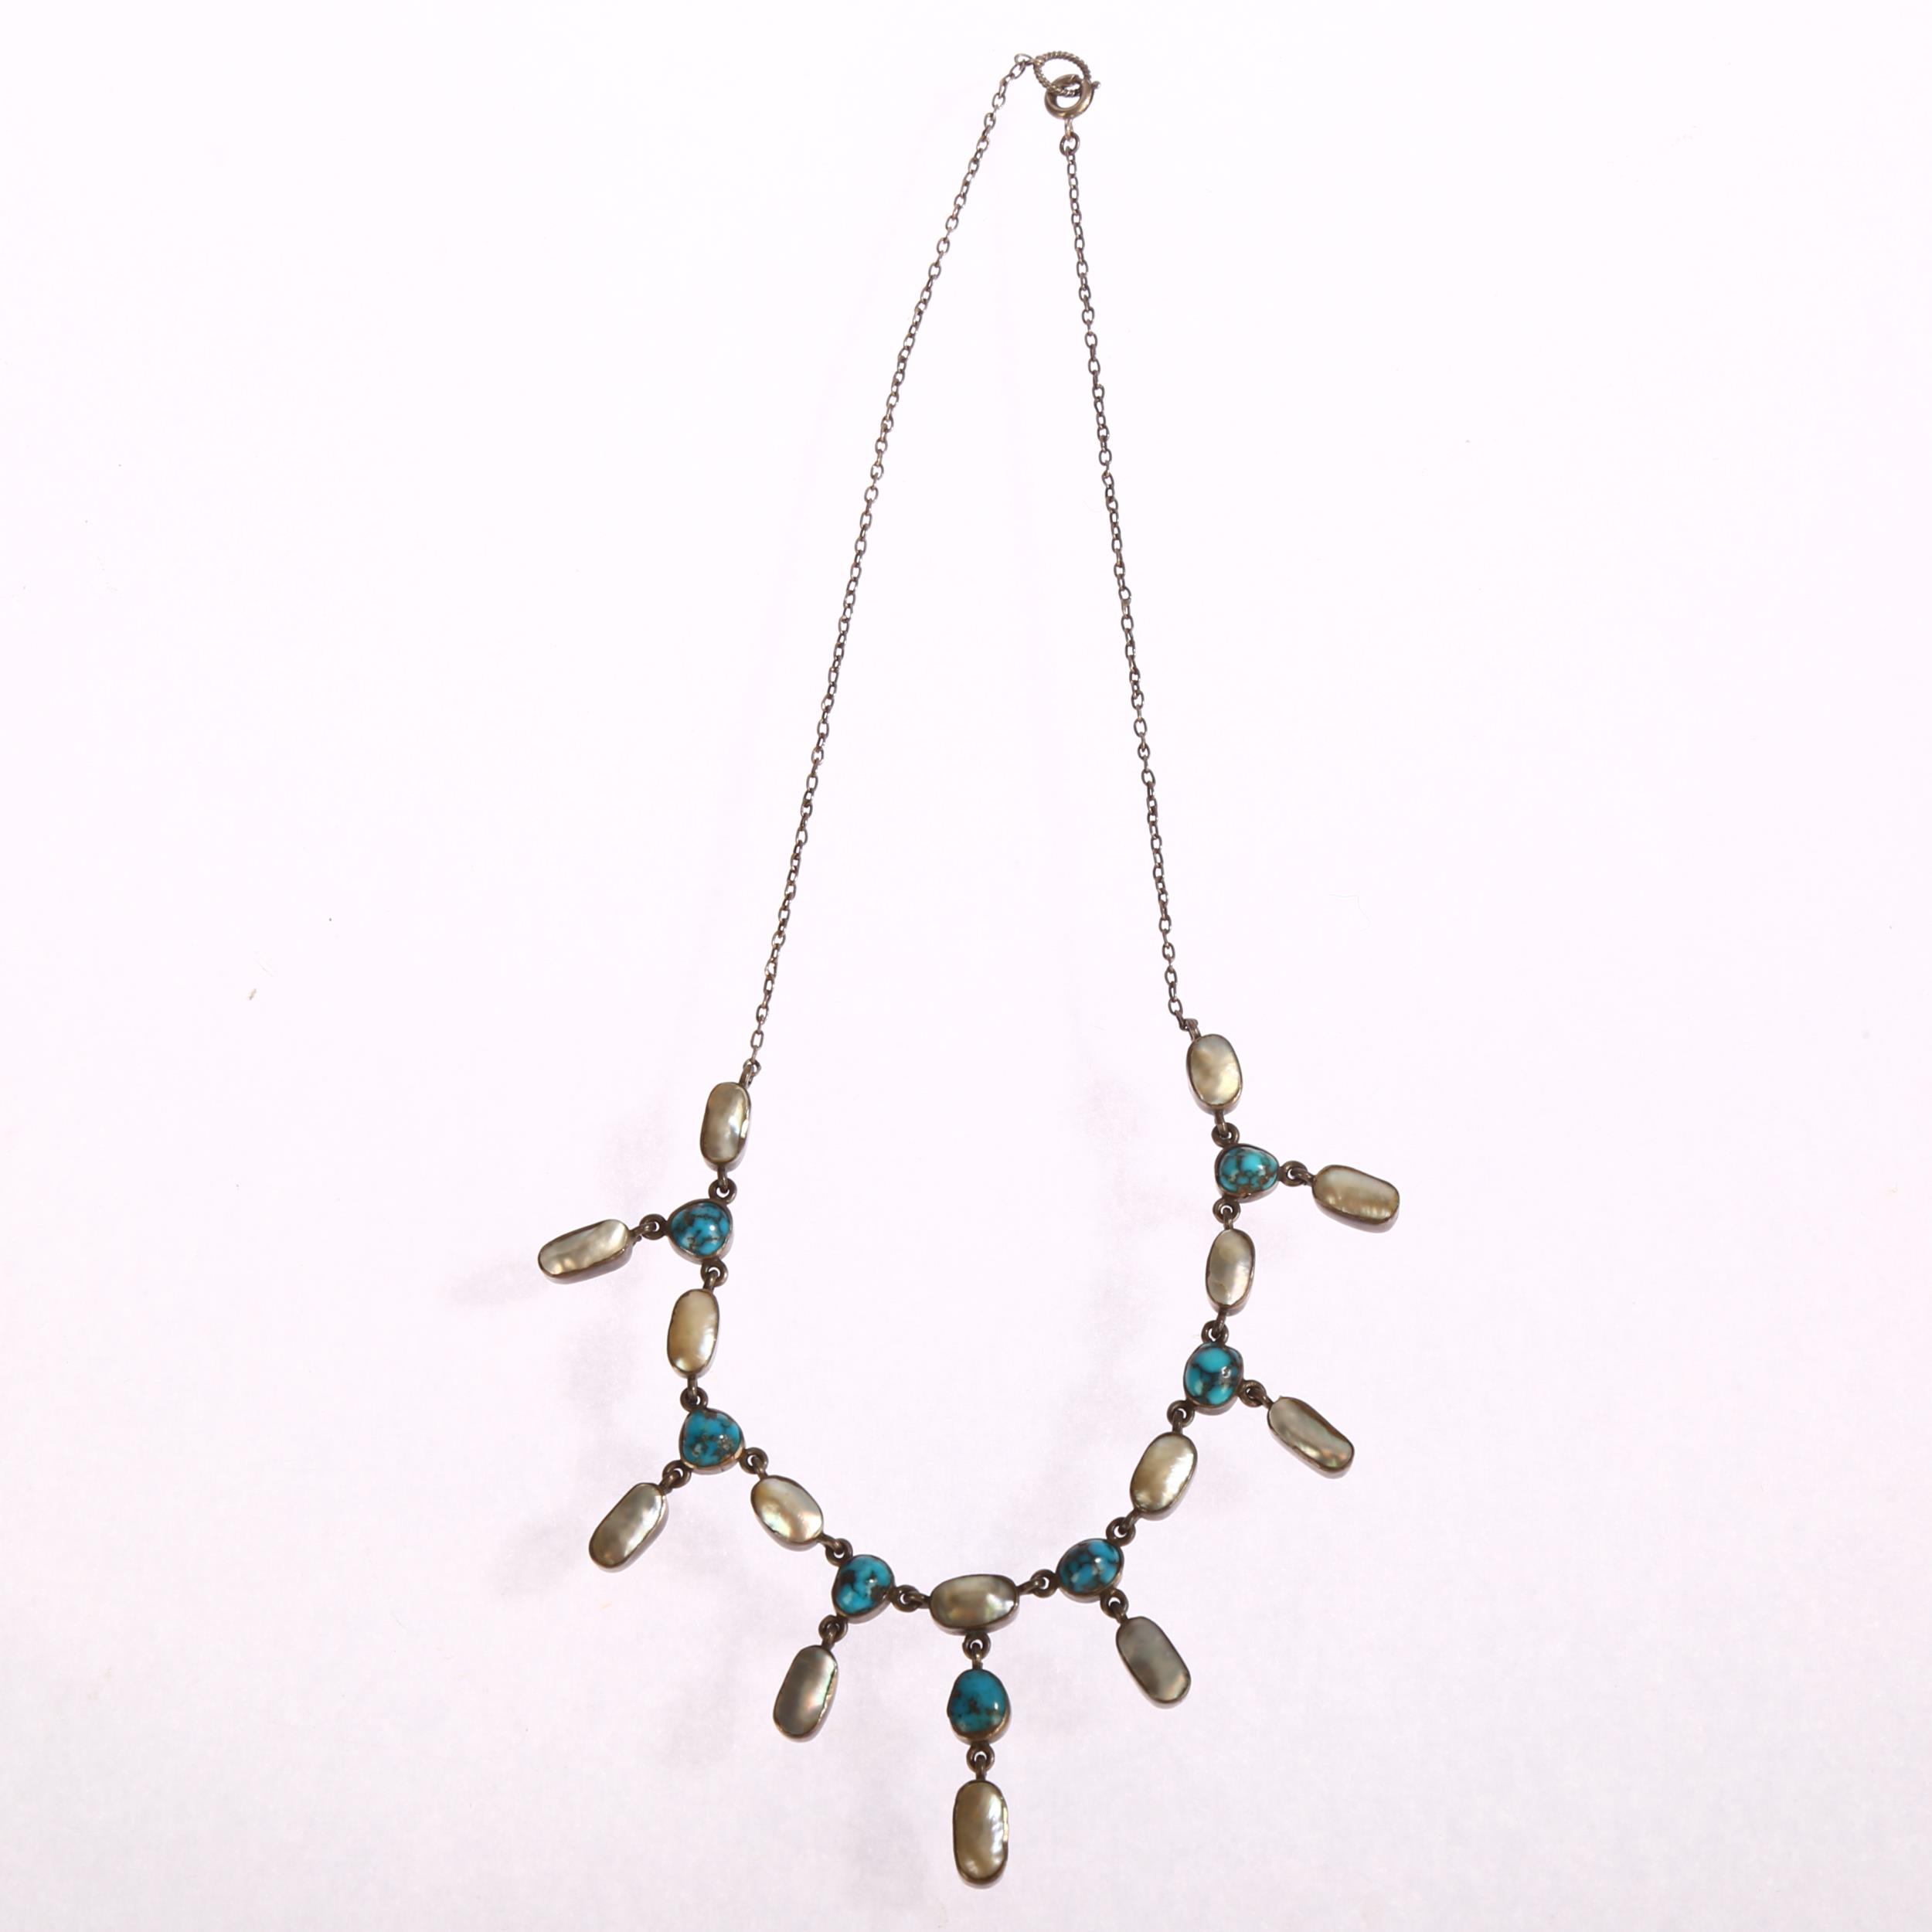 A silver turquoise and mother-of-pearl set fringed necklace, mid-20th century, length 41cm, unmarked - Image 2 of 3